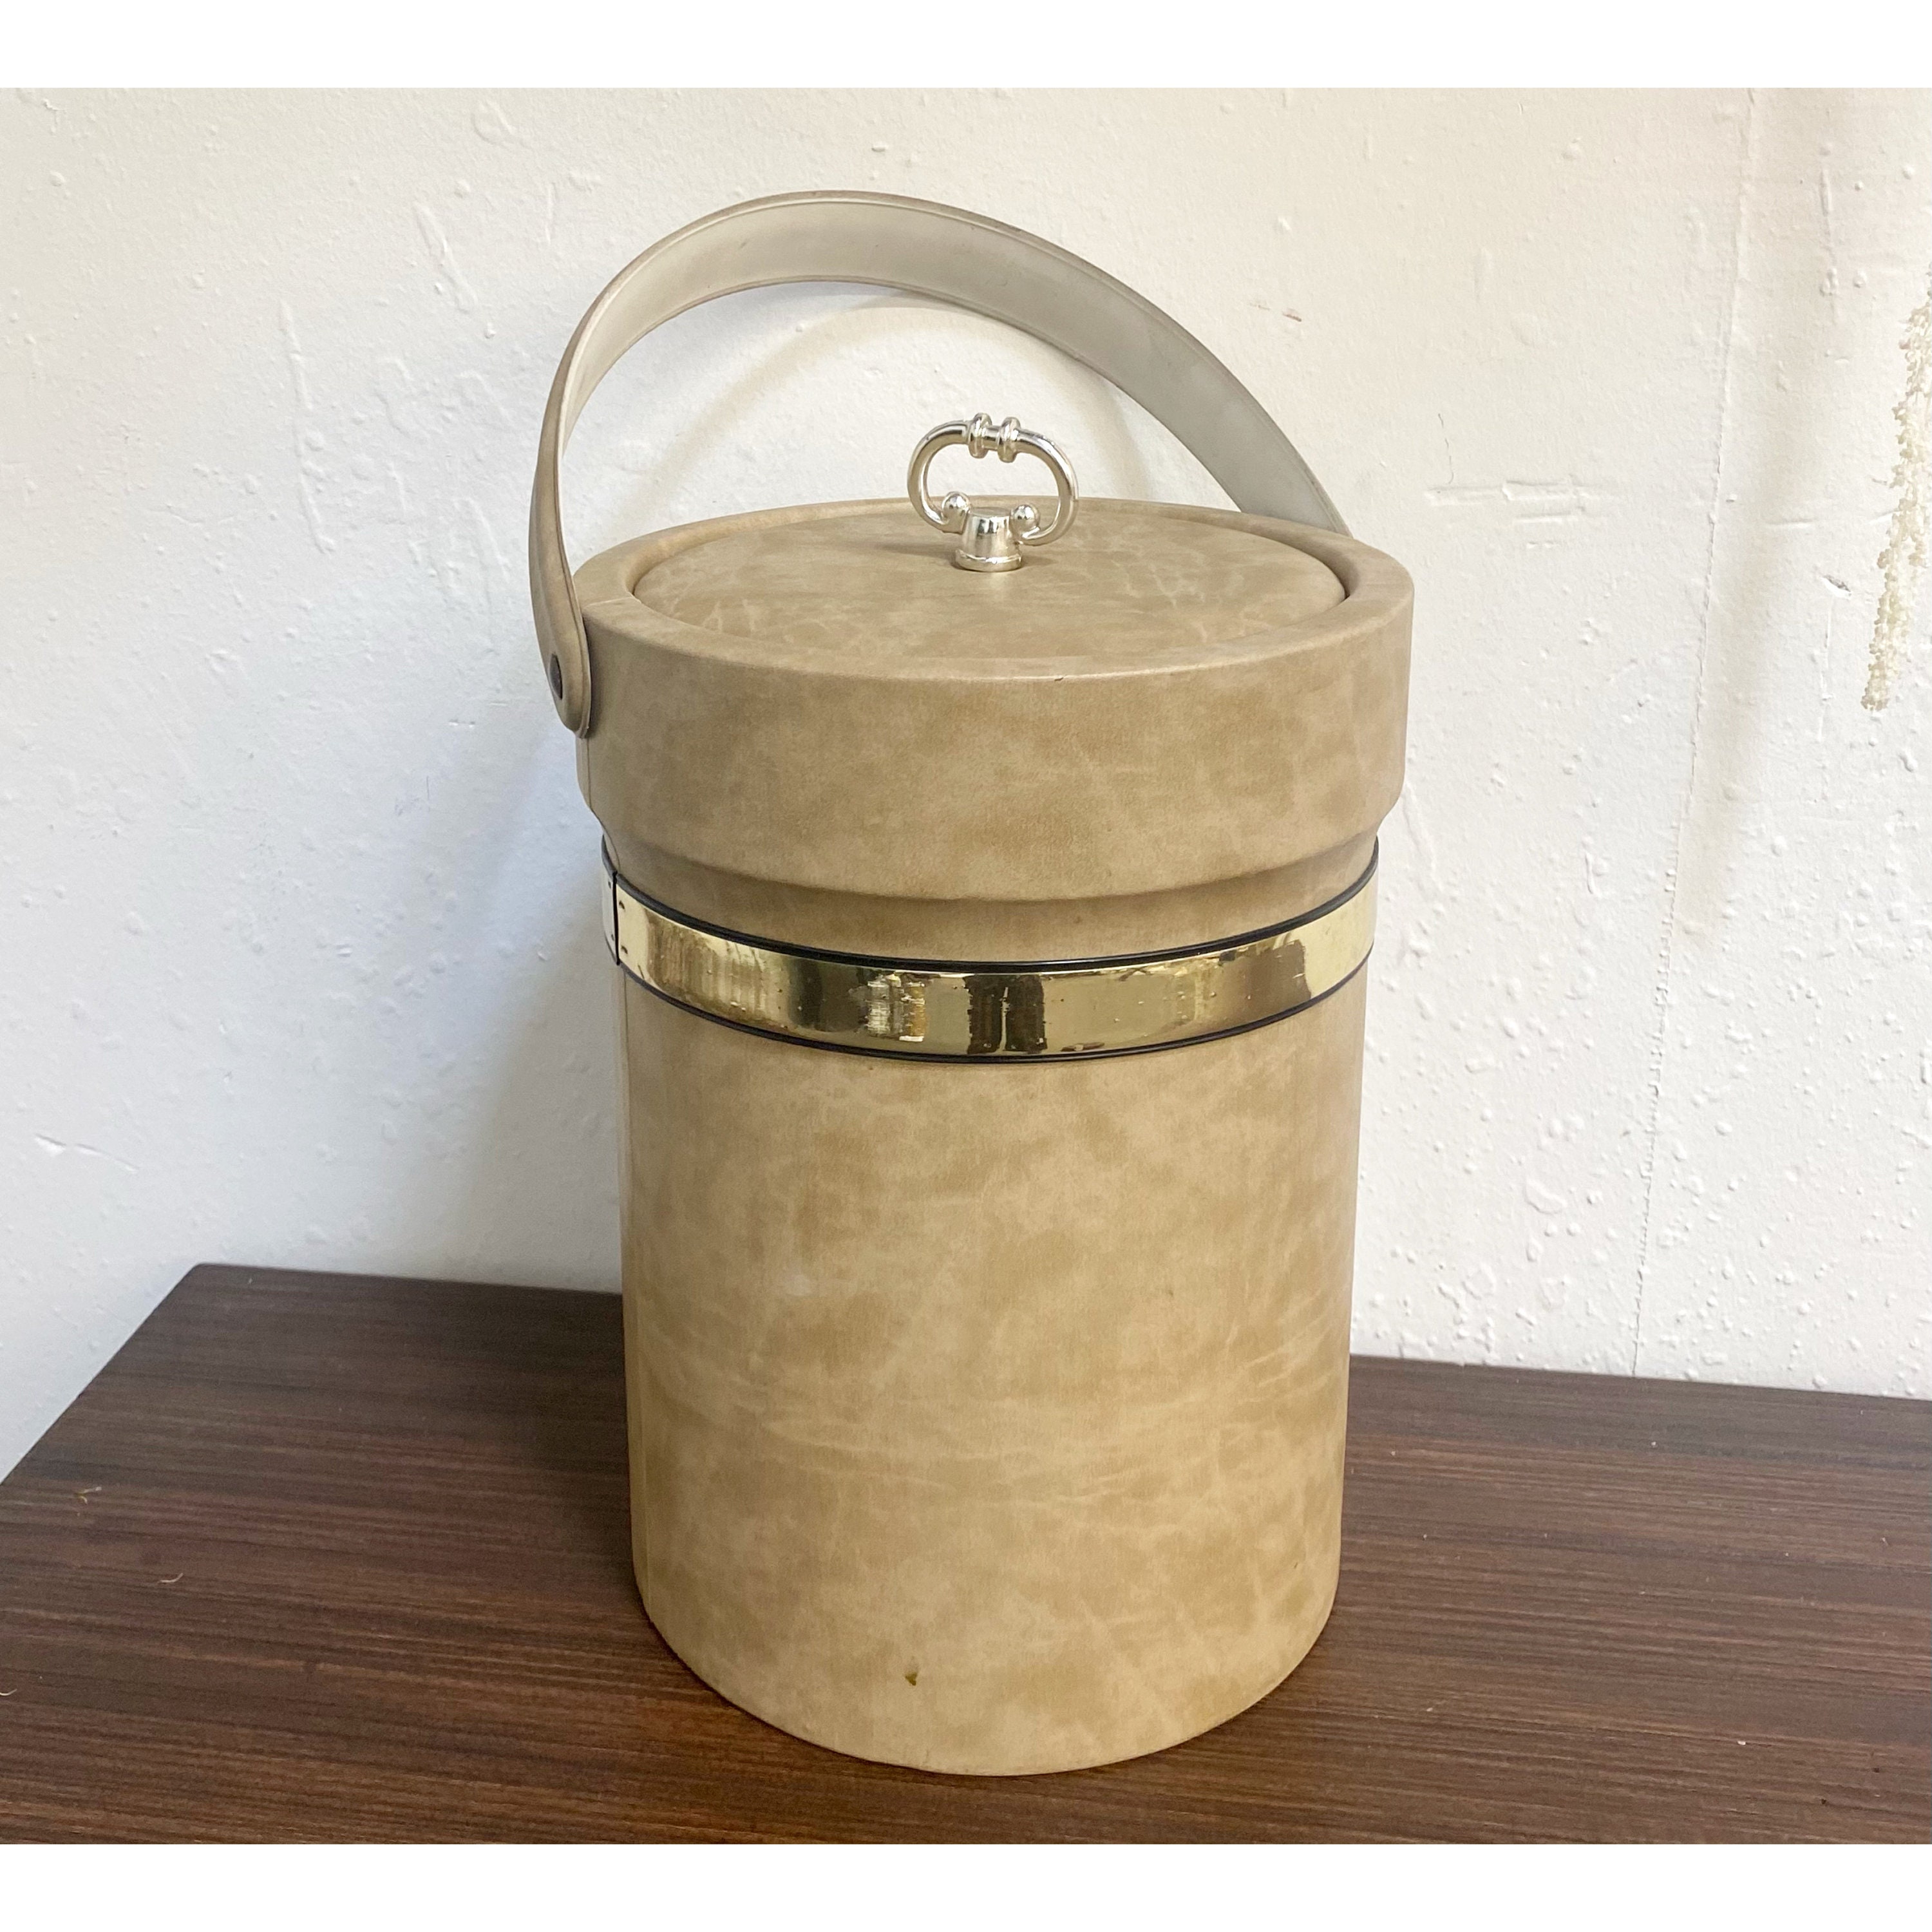 See Below for Important Info! Vintage Faux Leather Wrapped Ice Bucket by Sheltonware FREE SHIPPING Brown Barrel Style with  Brass Tones